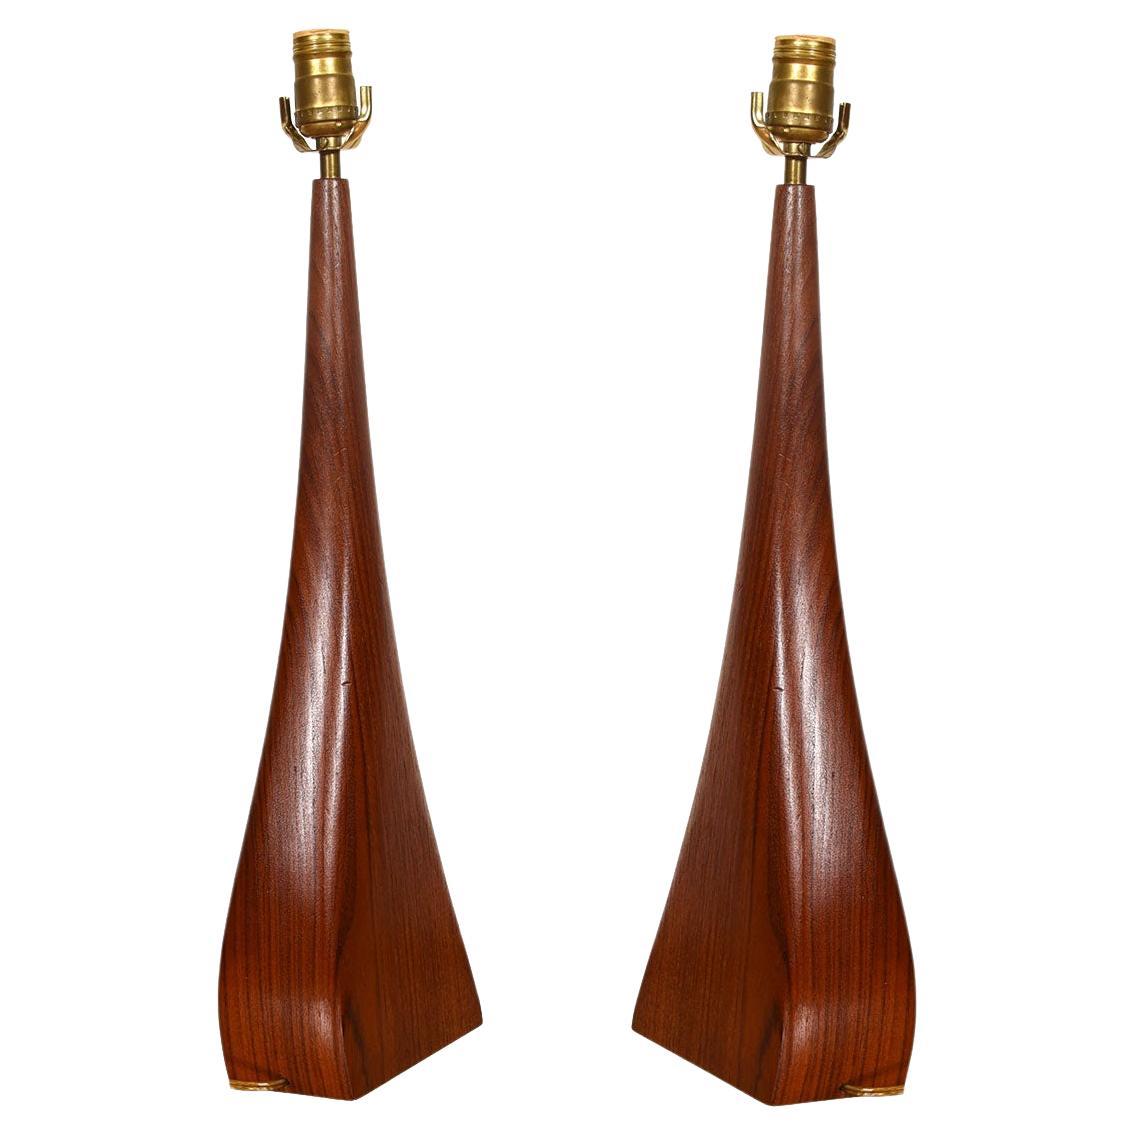 This amazing pair of lamps by Johannes Aasbjerg are biomorphic wedge shapes executed in teak.
Only manufactured for a short time in the early 1960s -- very hard to come by, especially in such a well preserved state.